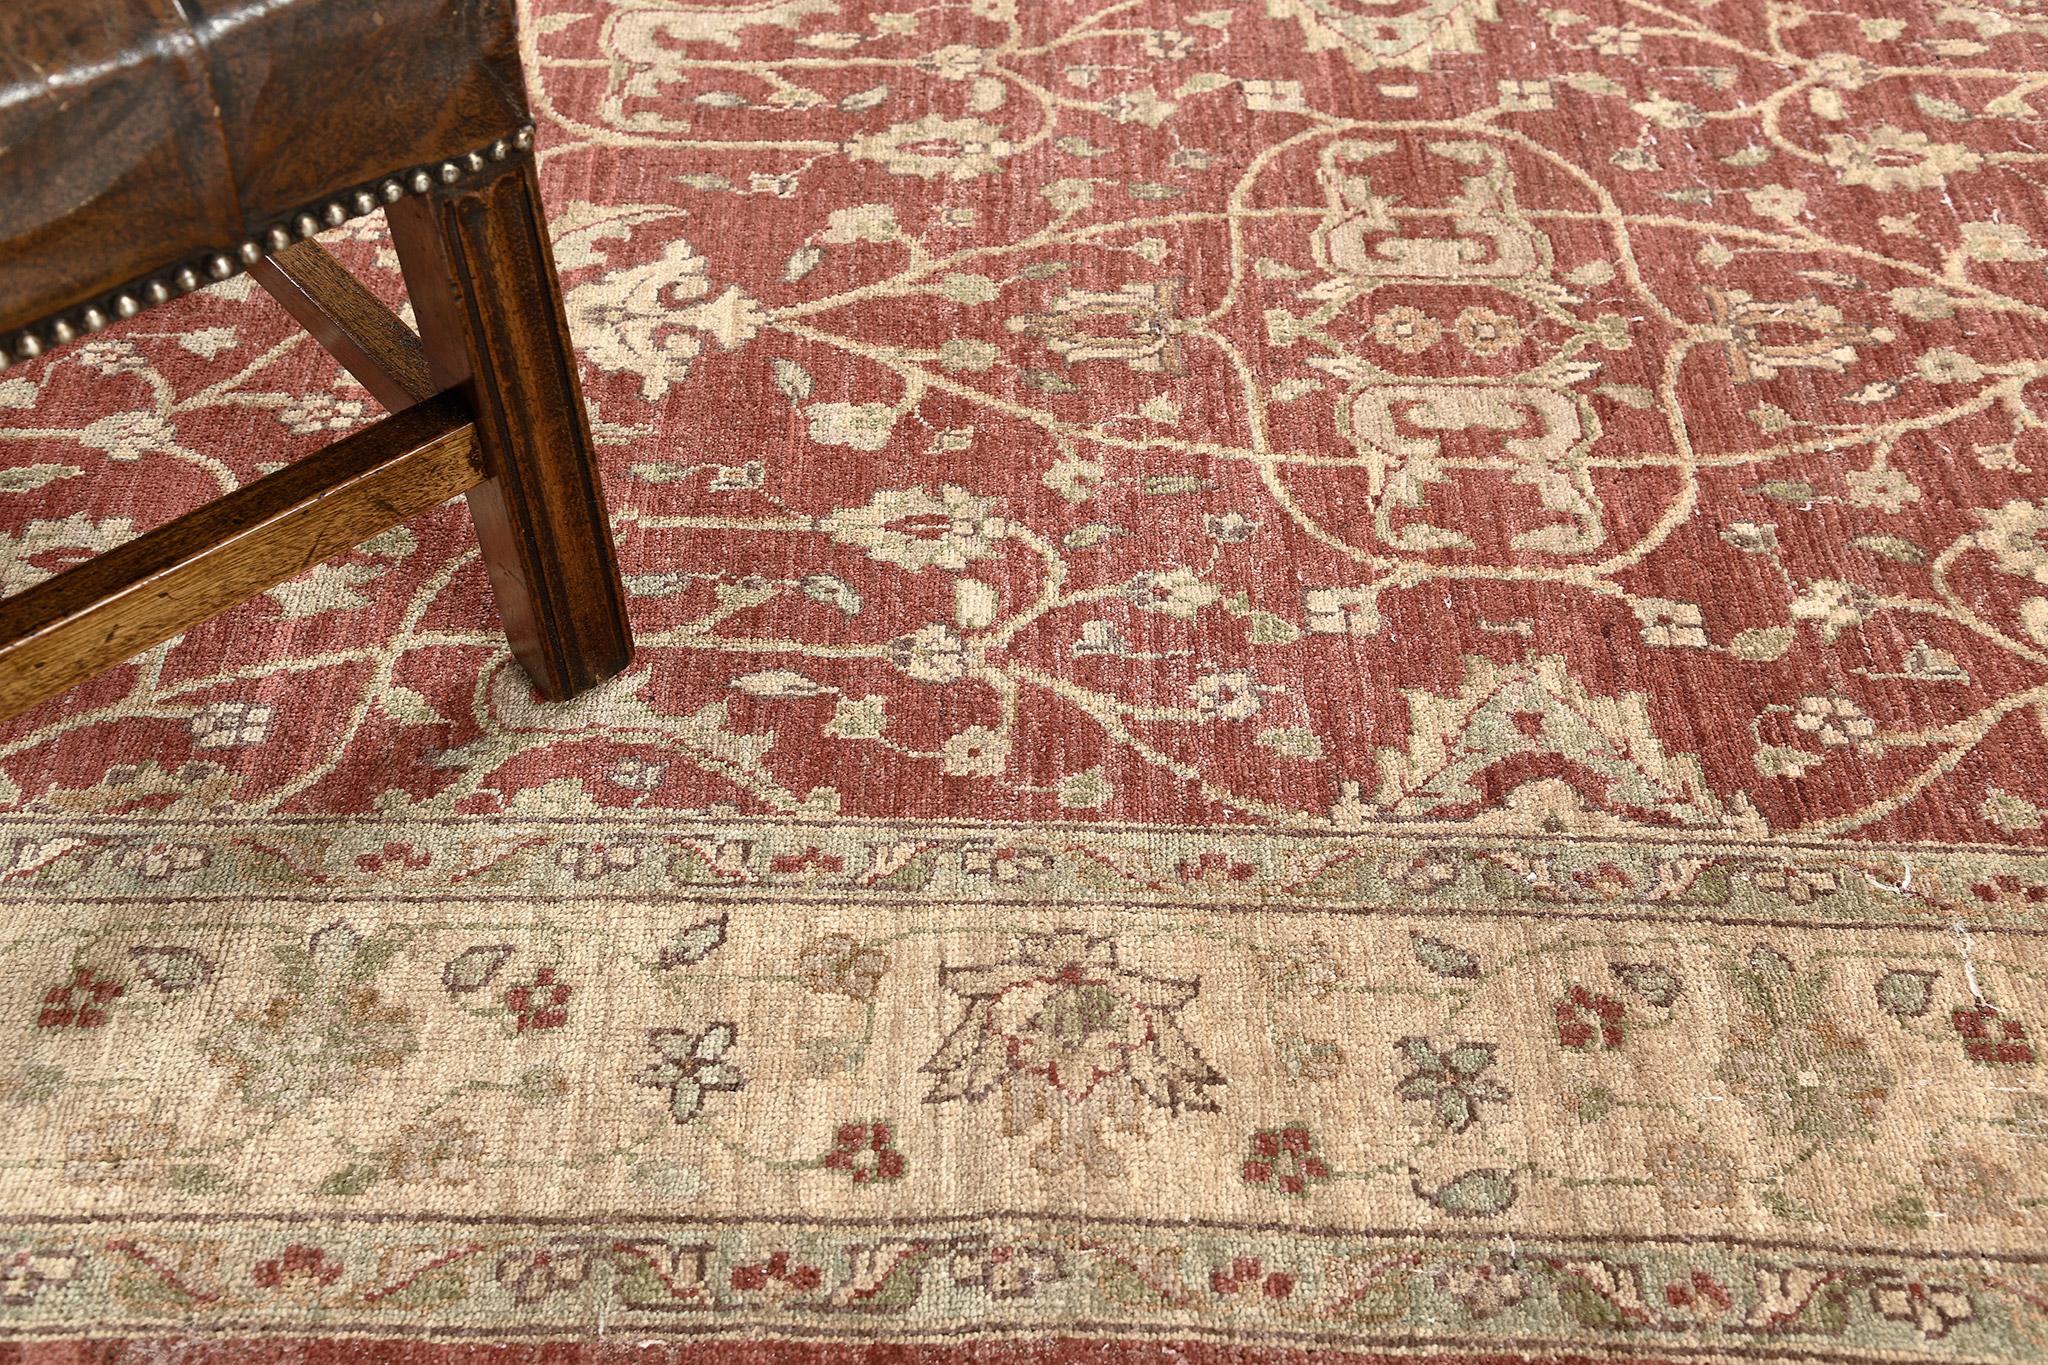 Beautiful florid adornments are expressed through gold embellishments to blooming and fascinating dusty red fields. The borders are beautifully hand-woven that created from a vegetable dye to form an elegant Zigler Runner. Truly an extraordinary